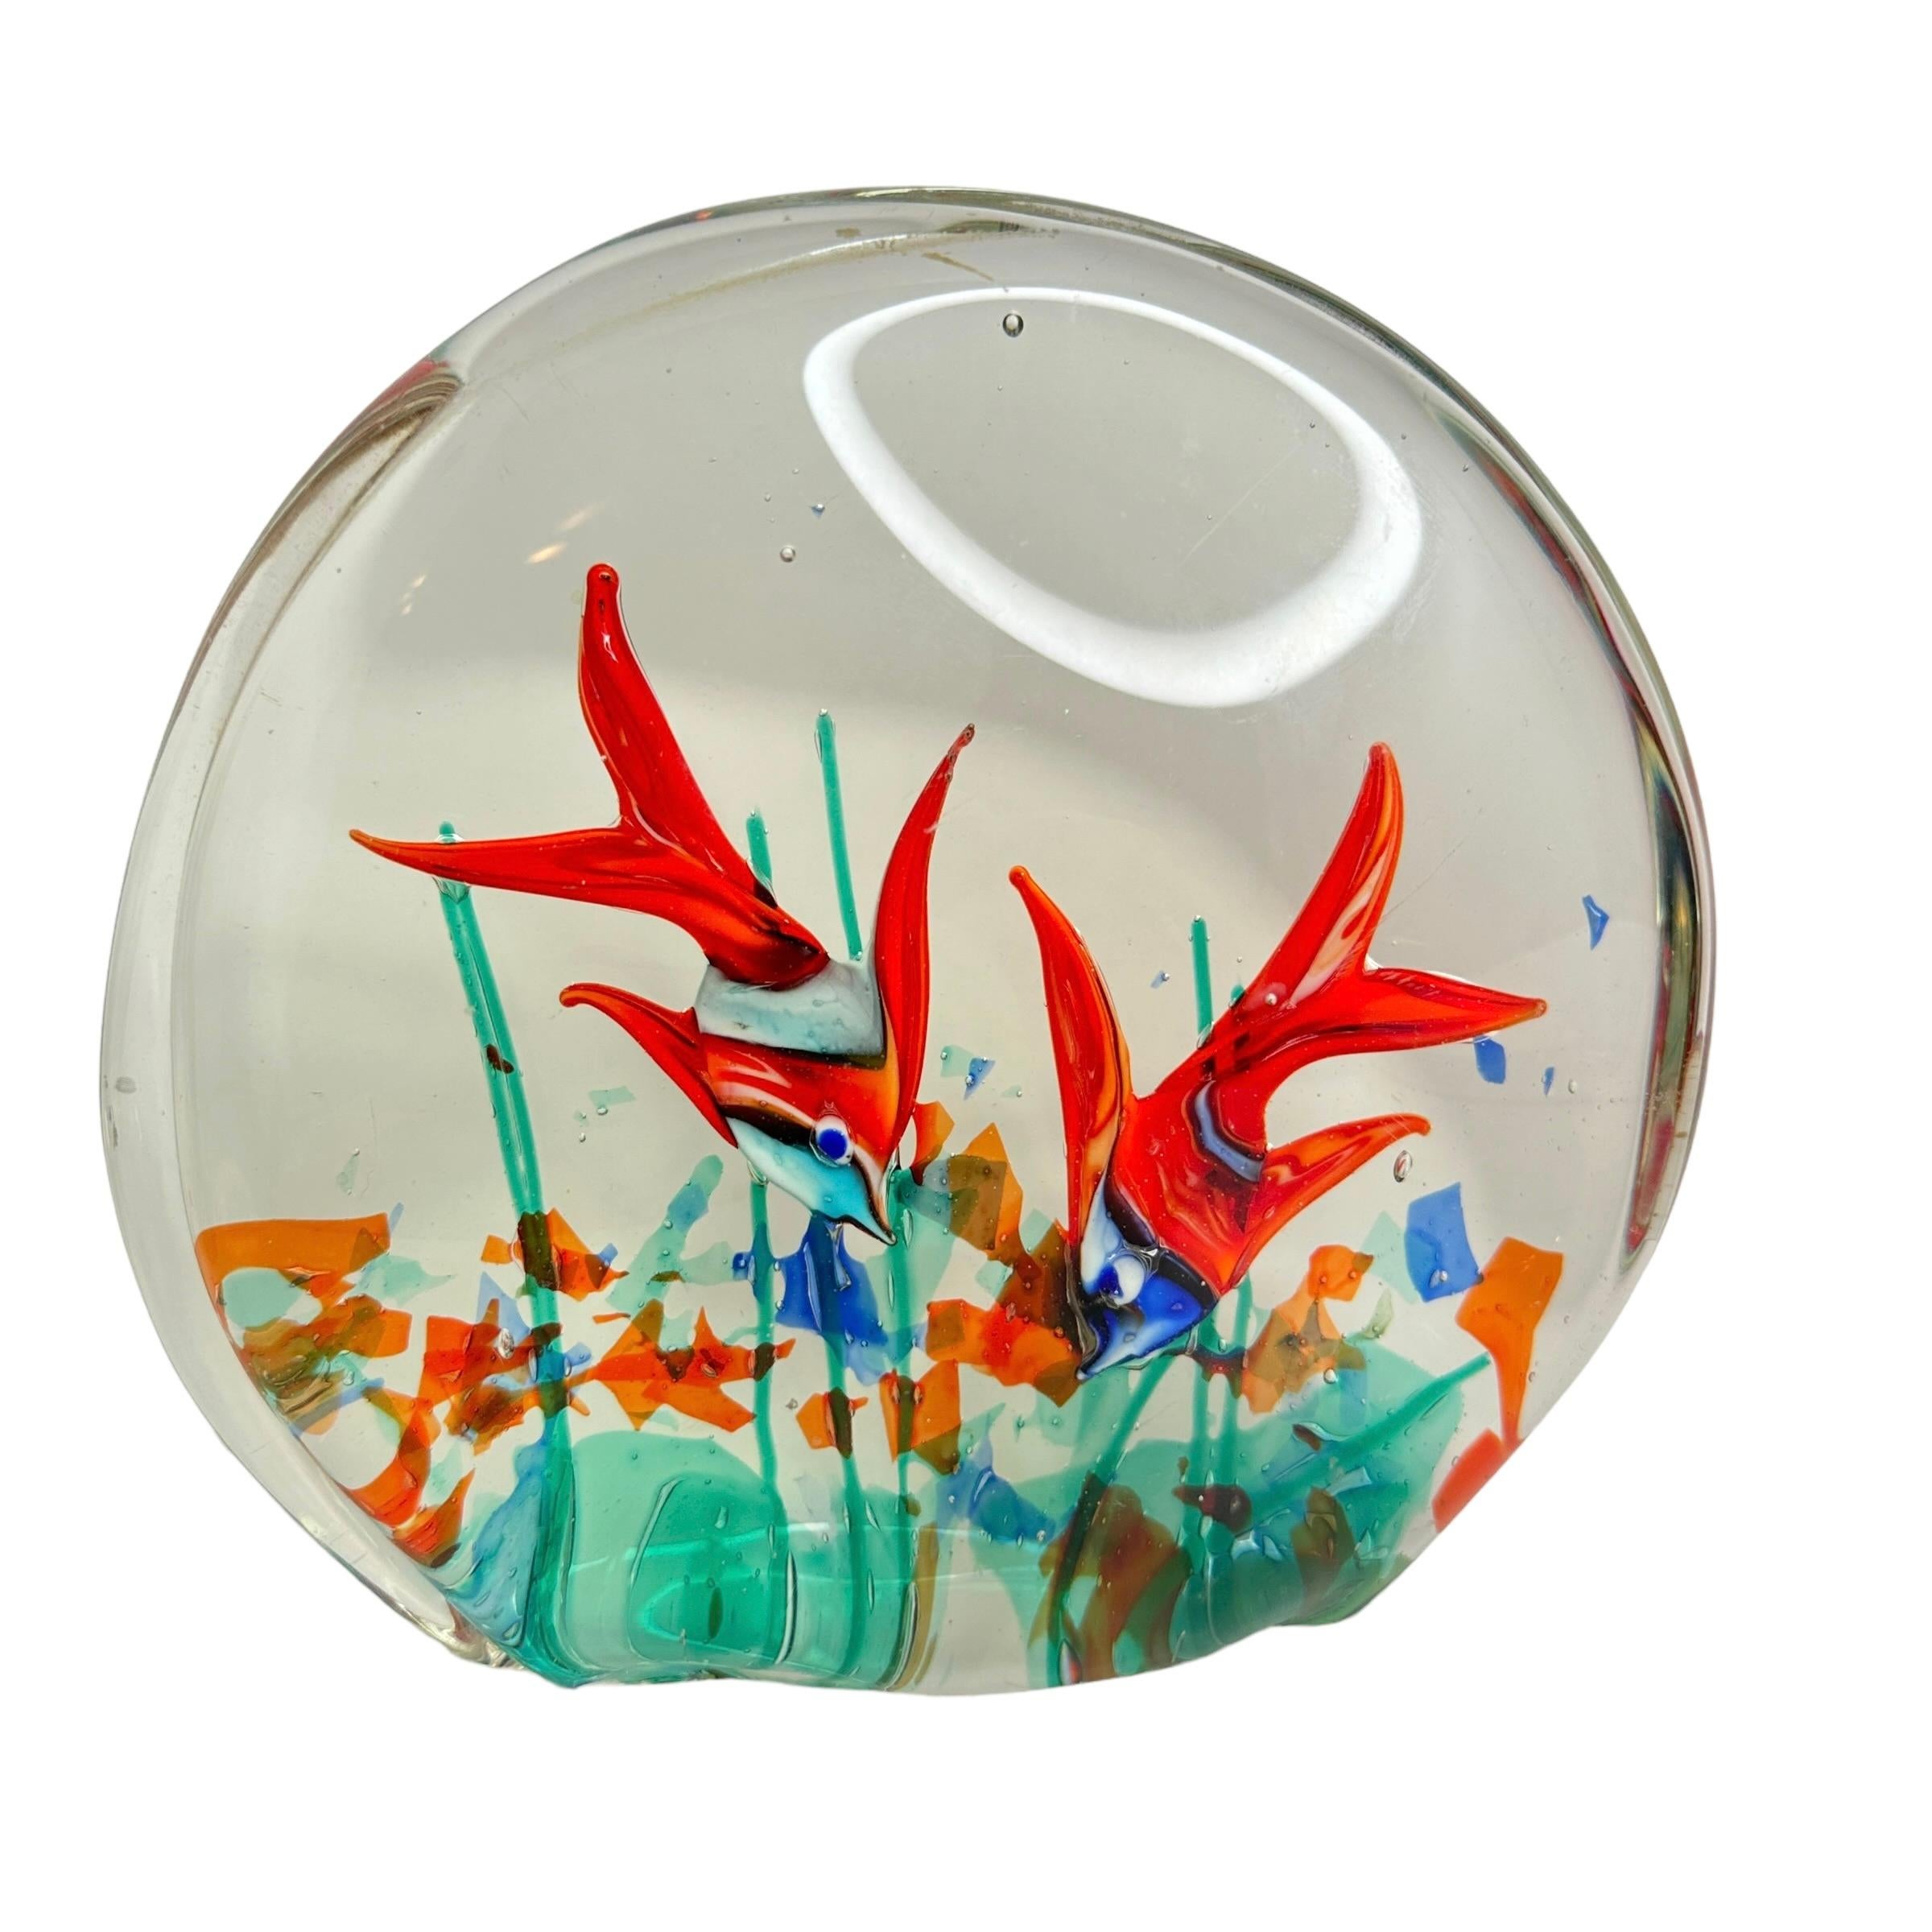 Beautiful Murano hand blown aquarium Italian art glass sculpture. Showing two fish in a reef. Colors are different shades of blue, red, green and clear. Created in the manner of designer Riccardo Licata. The fish are sandwiched in glass layers,